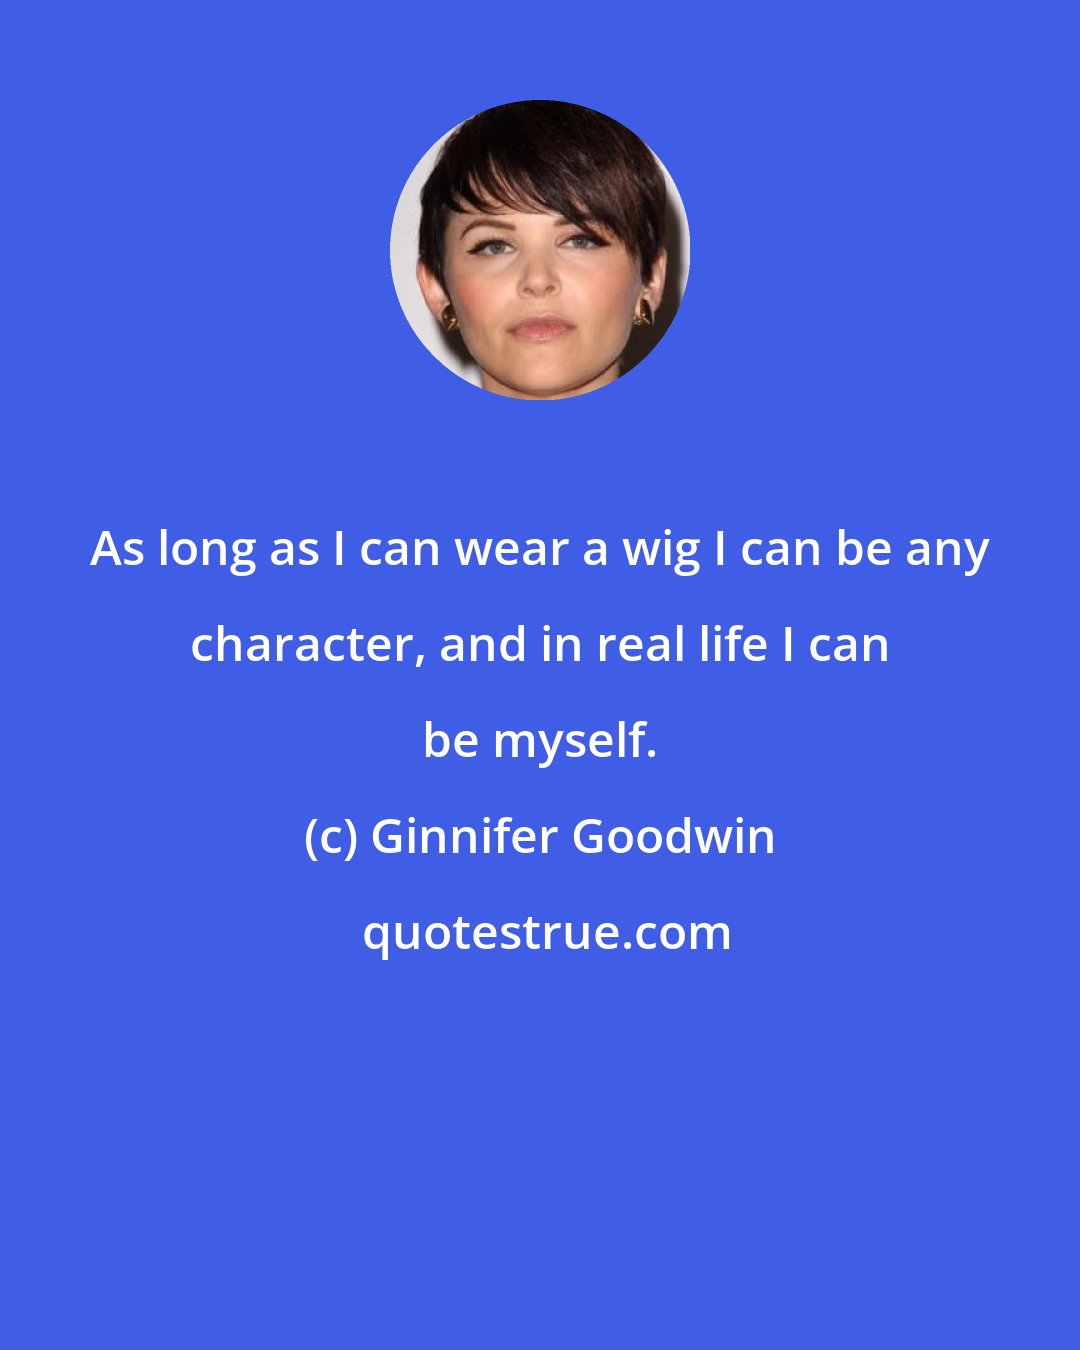 Ginnifer Goodwin: As long as I can wear a wig I can be any character, and in real life I can be myself.